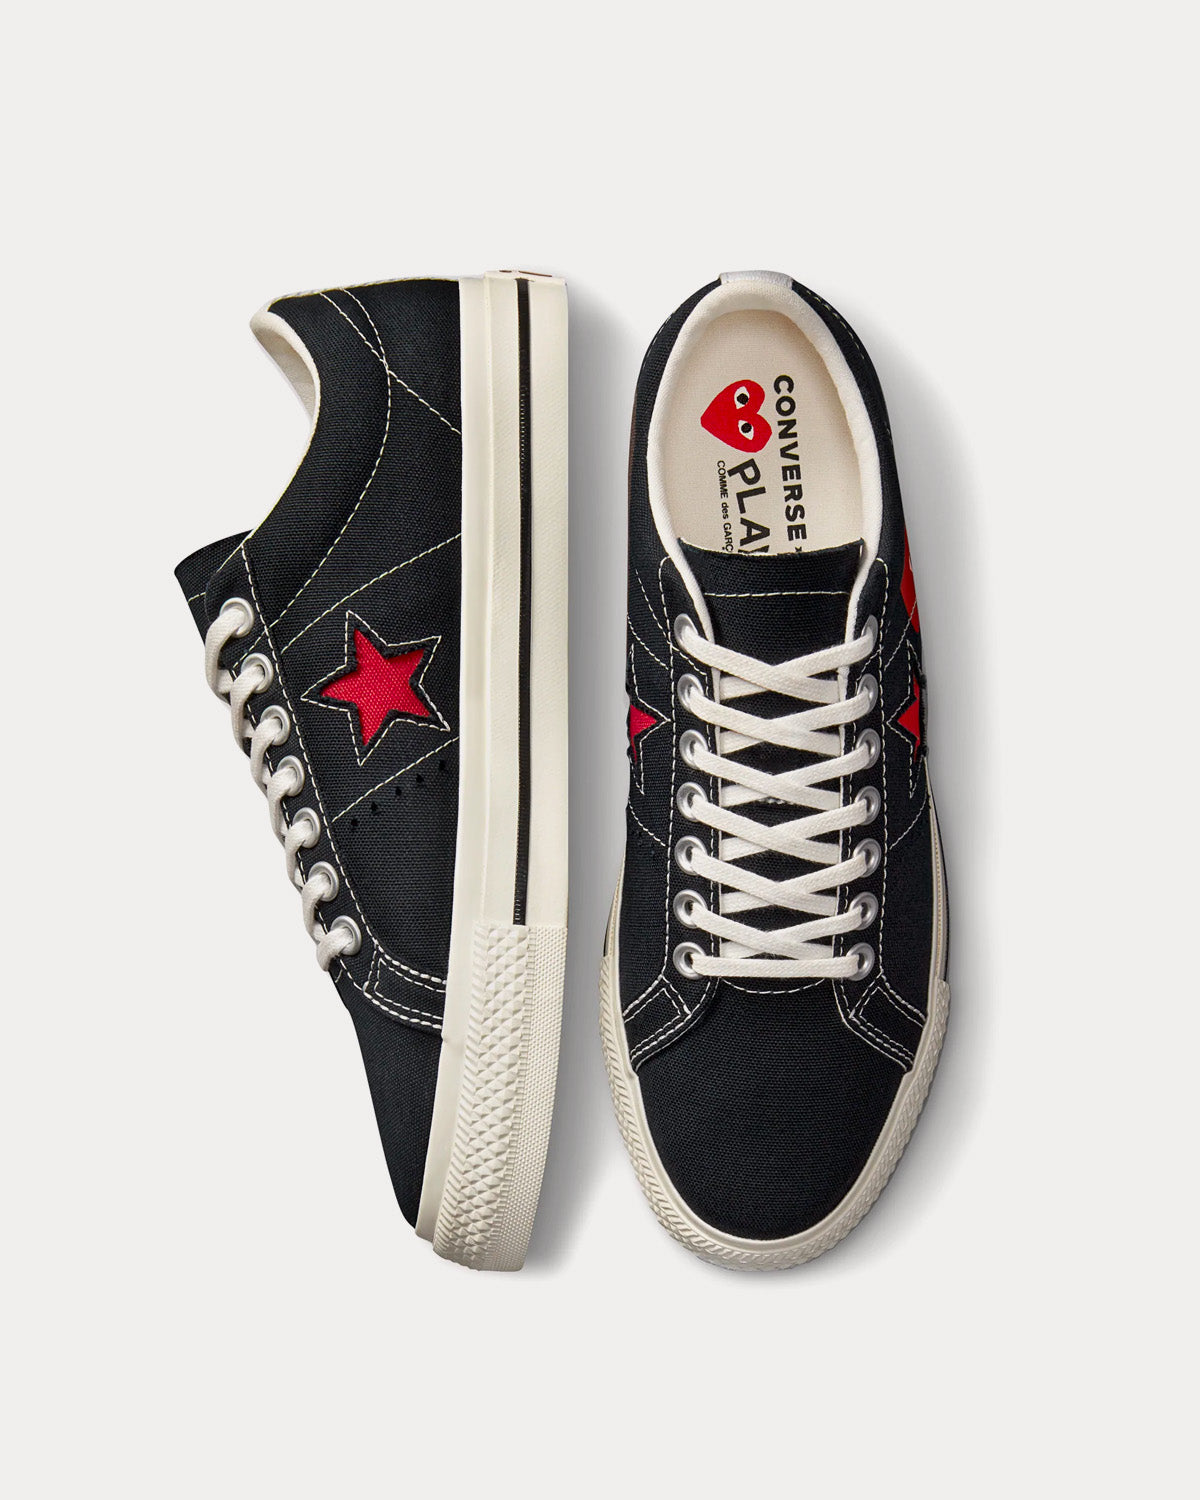 Converse x Comme des Garçons PLAY - One Star Red Heart Black Low Top Sneakers